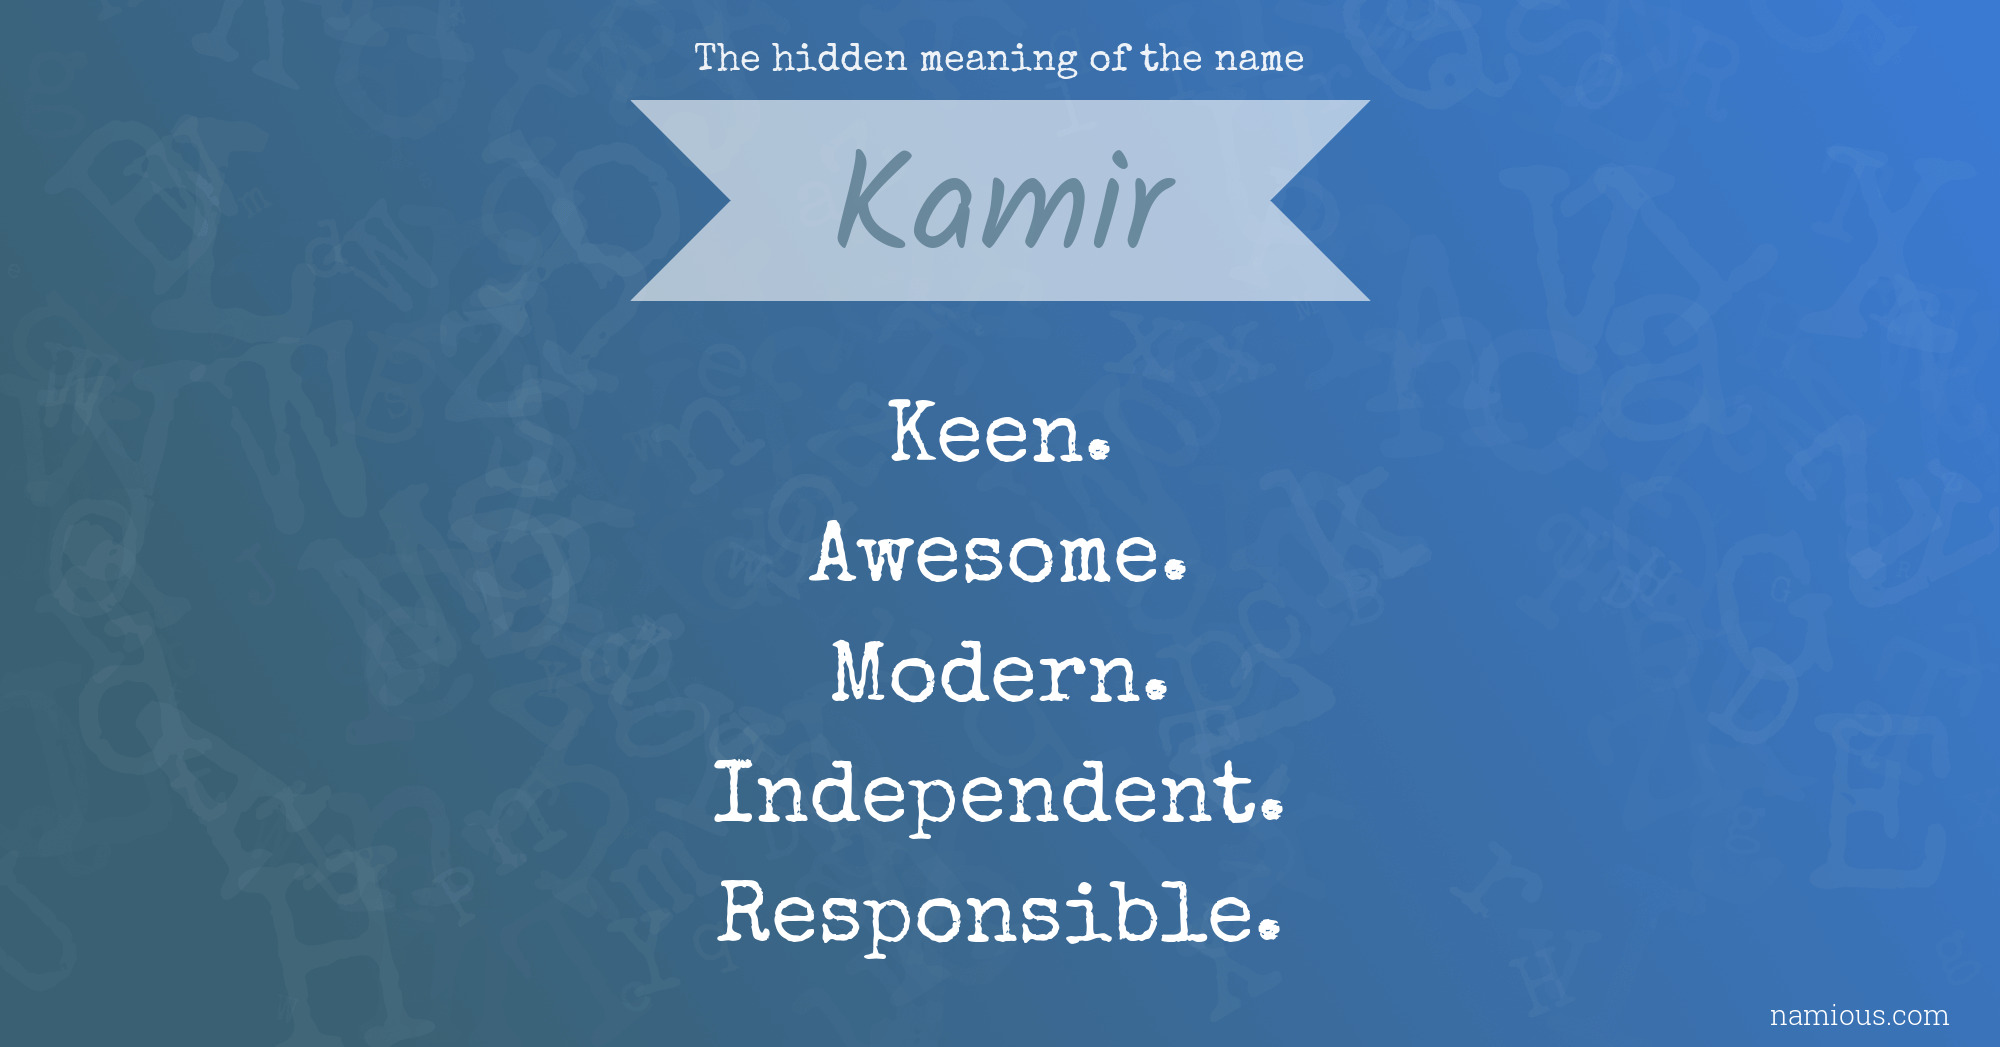 The hidden meaning of the name Kamir